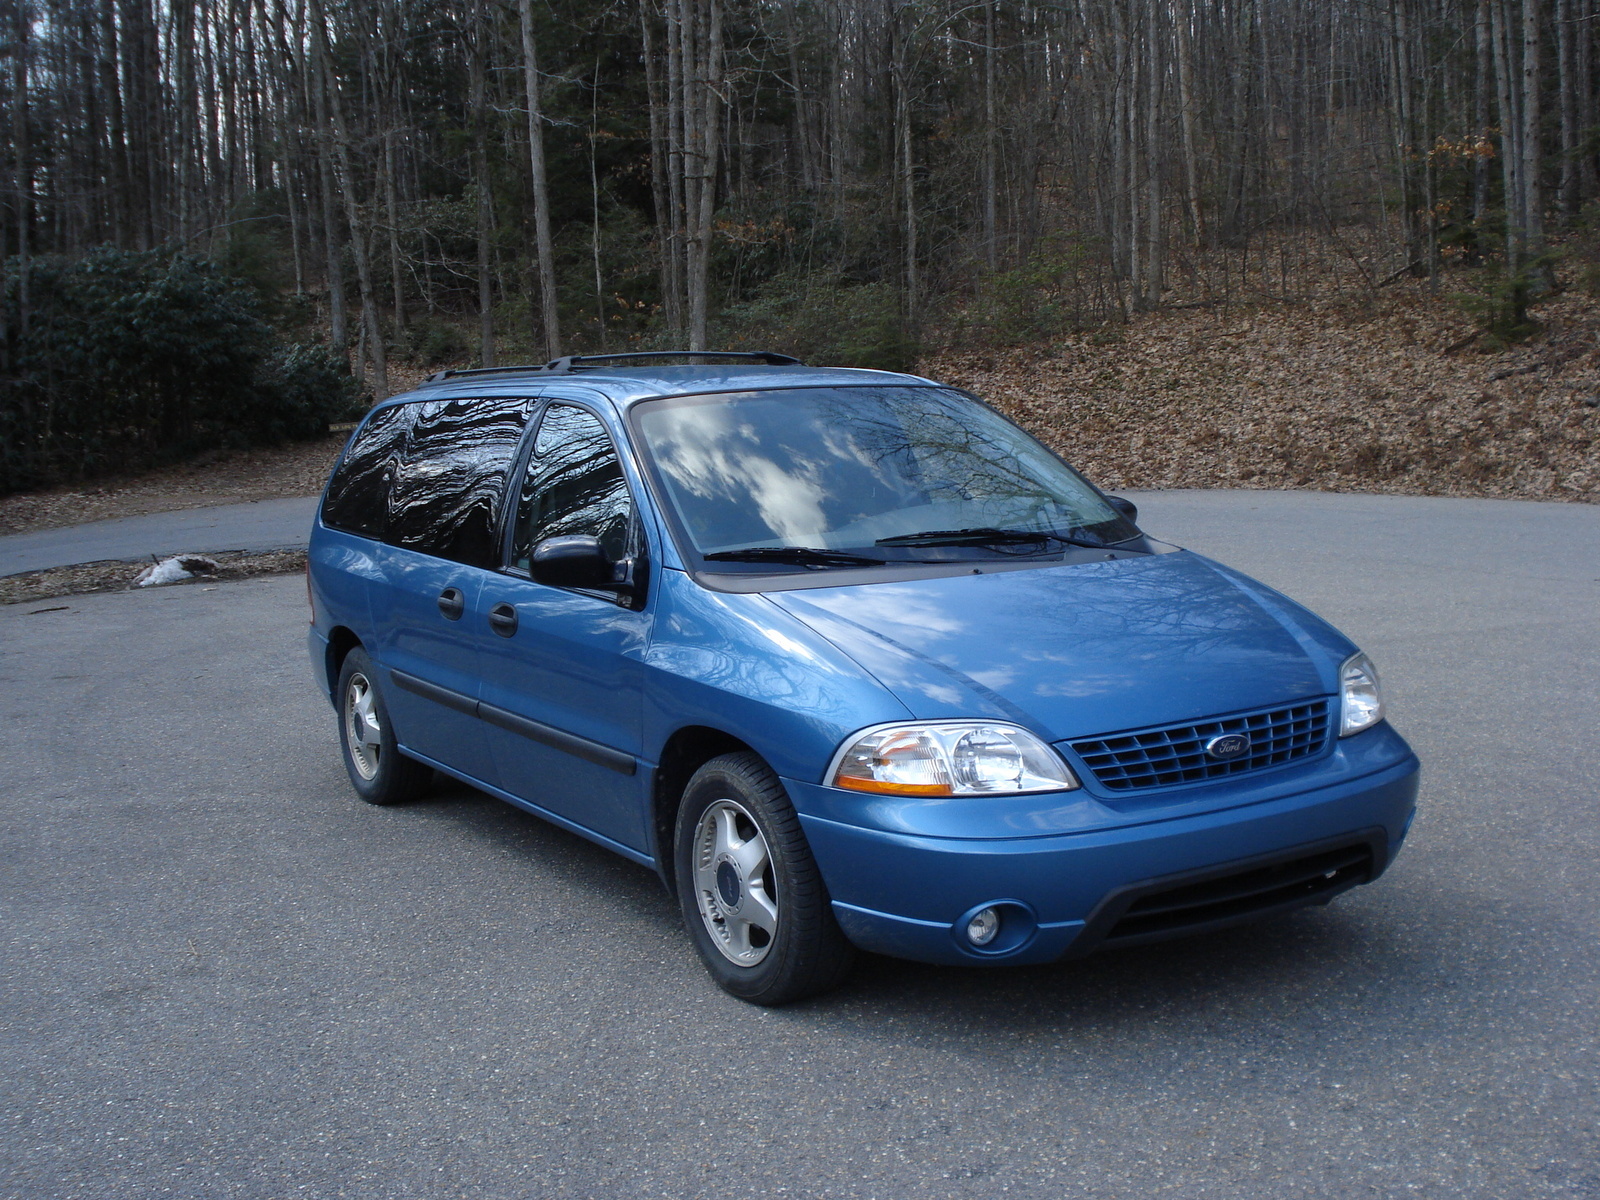 Ford Windstar Test Drive Review - CarGurus